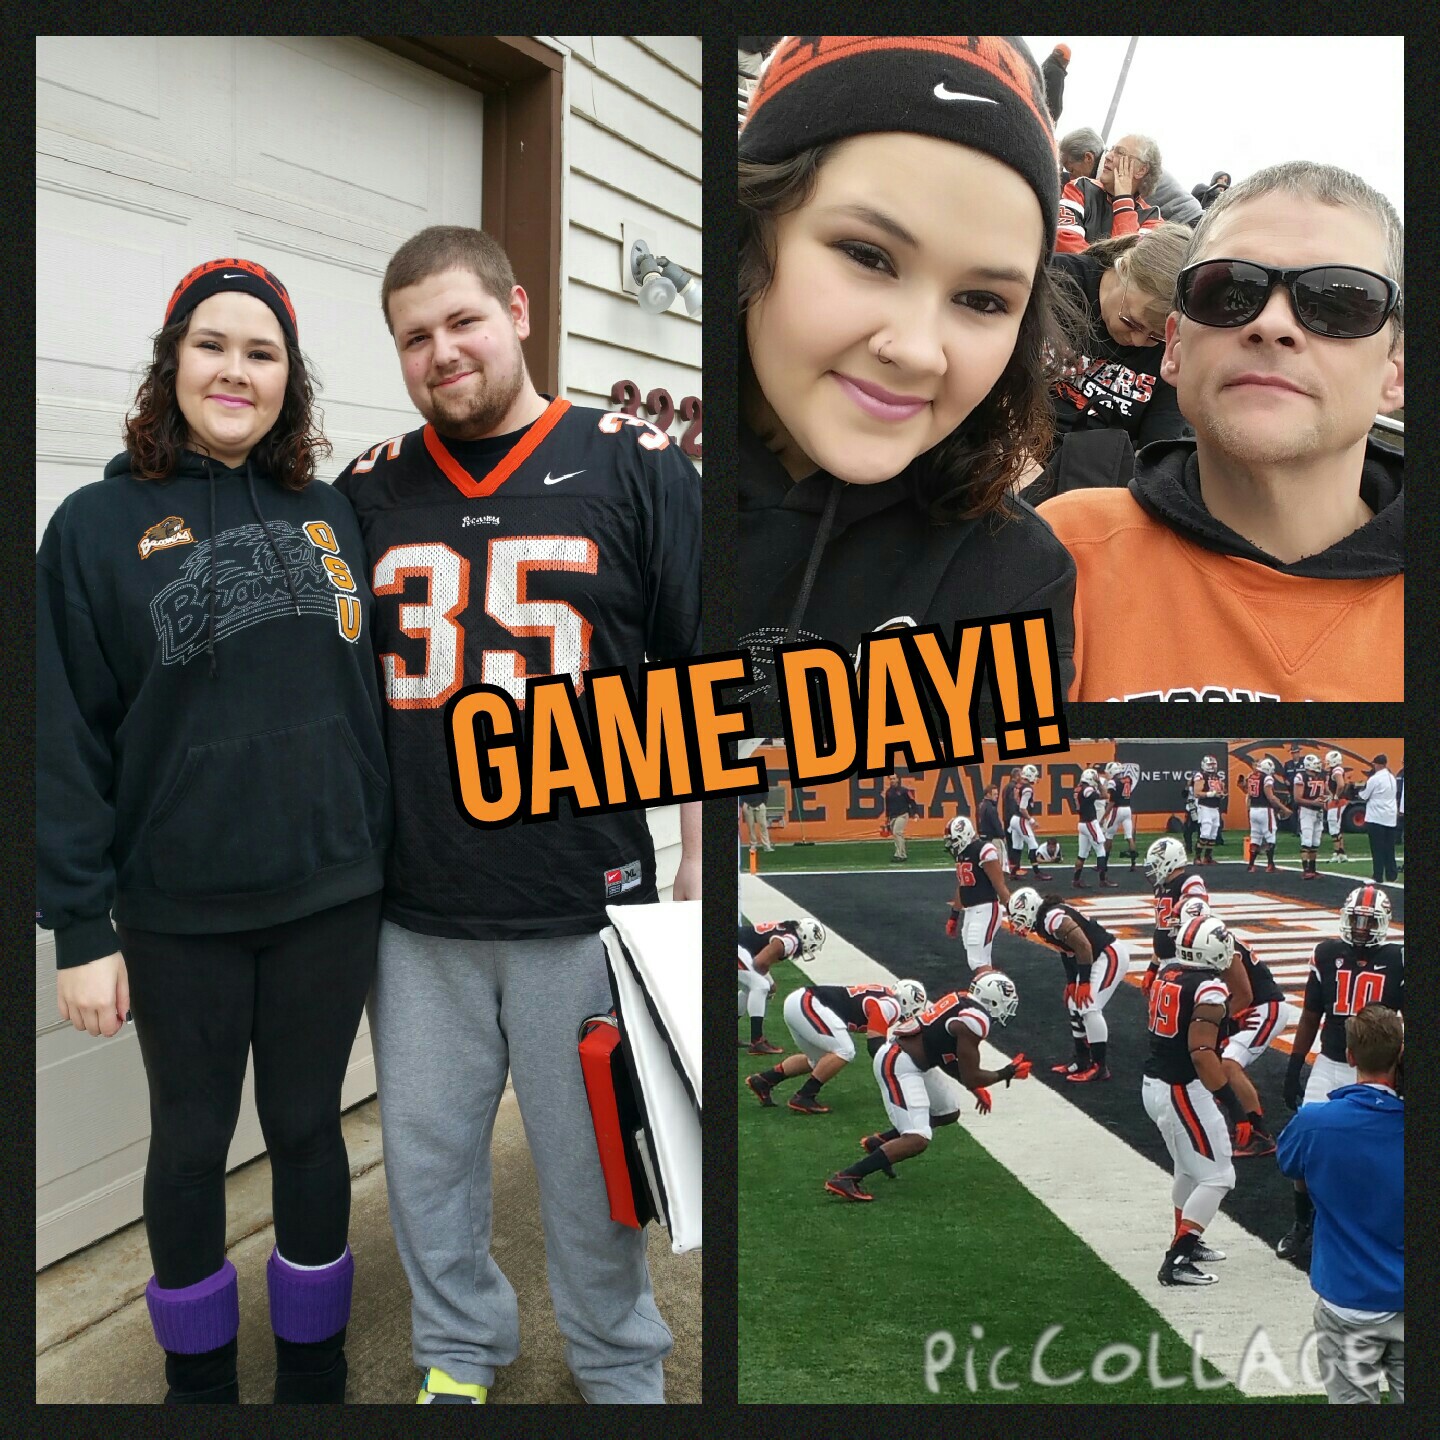 A collage of three picture. The first my boyfriend, Dustin, and my in our Beaver gear. The second my father and me at half time, and the last one if the football players practicing before the game started. Over the collage it says Game Day! in bold orange letters.